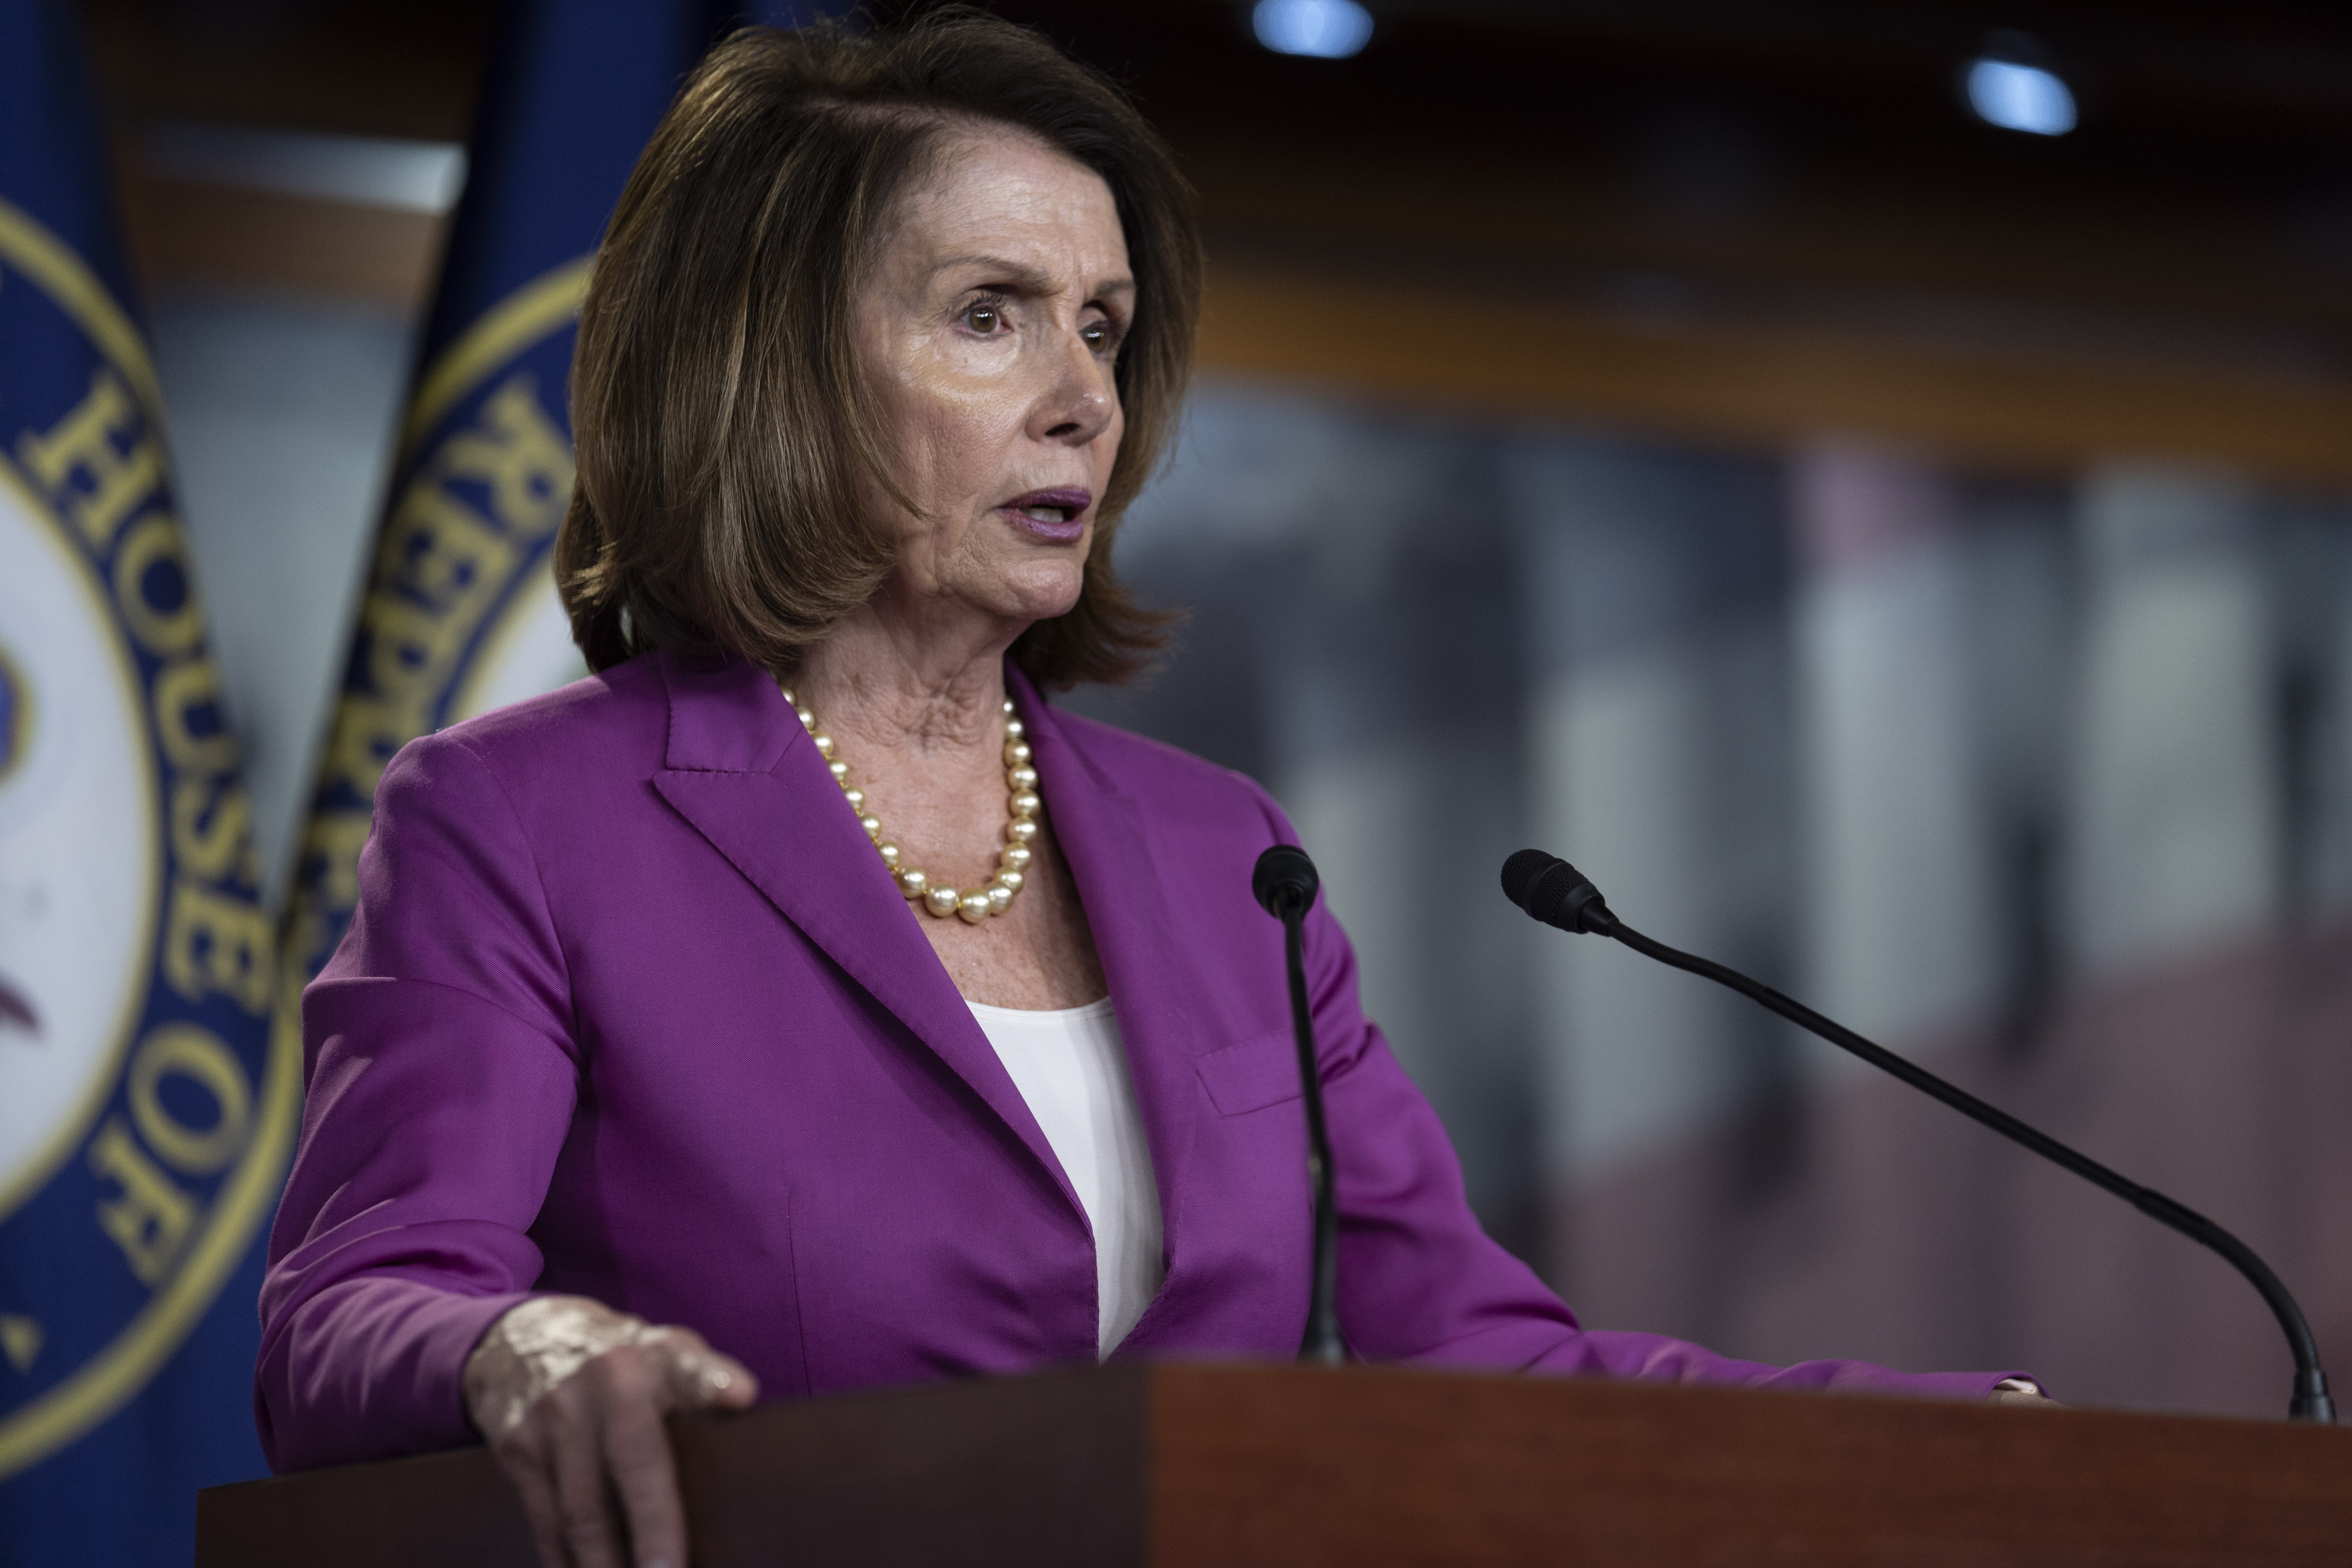 2018 Disaster — Nancy Pelosi's Favorability Among Dems Is ...